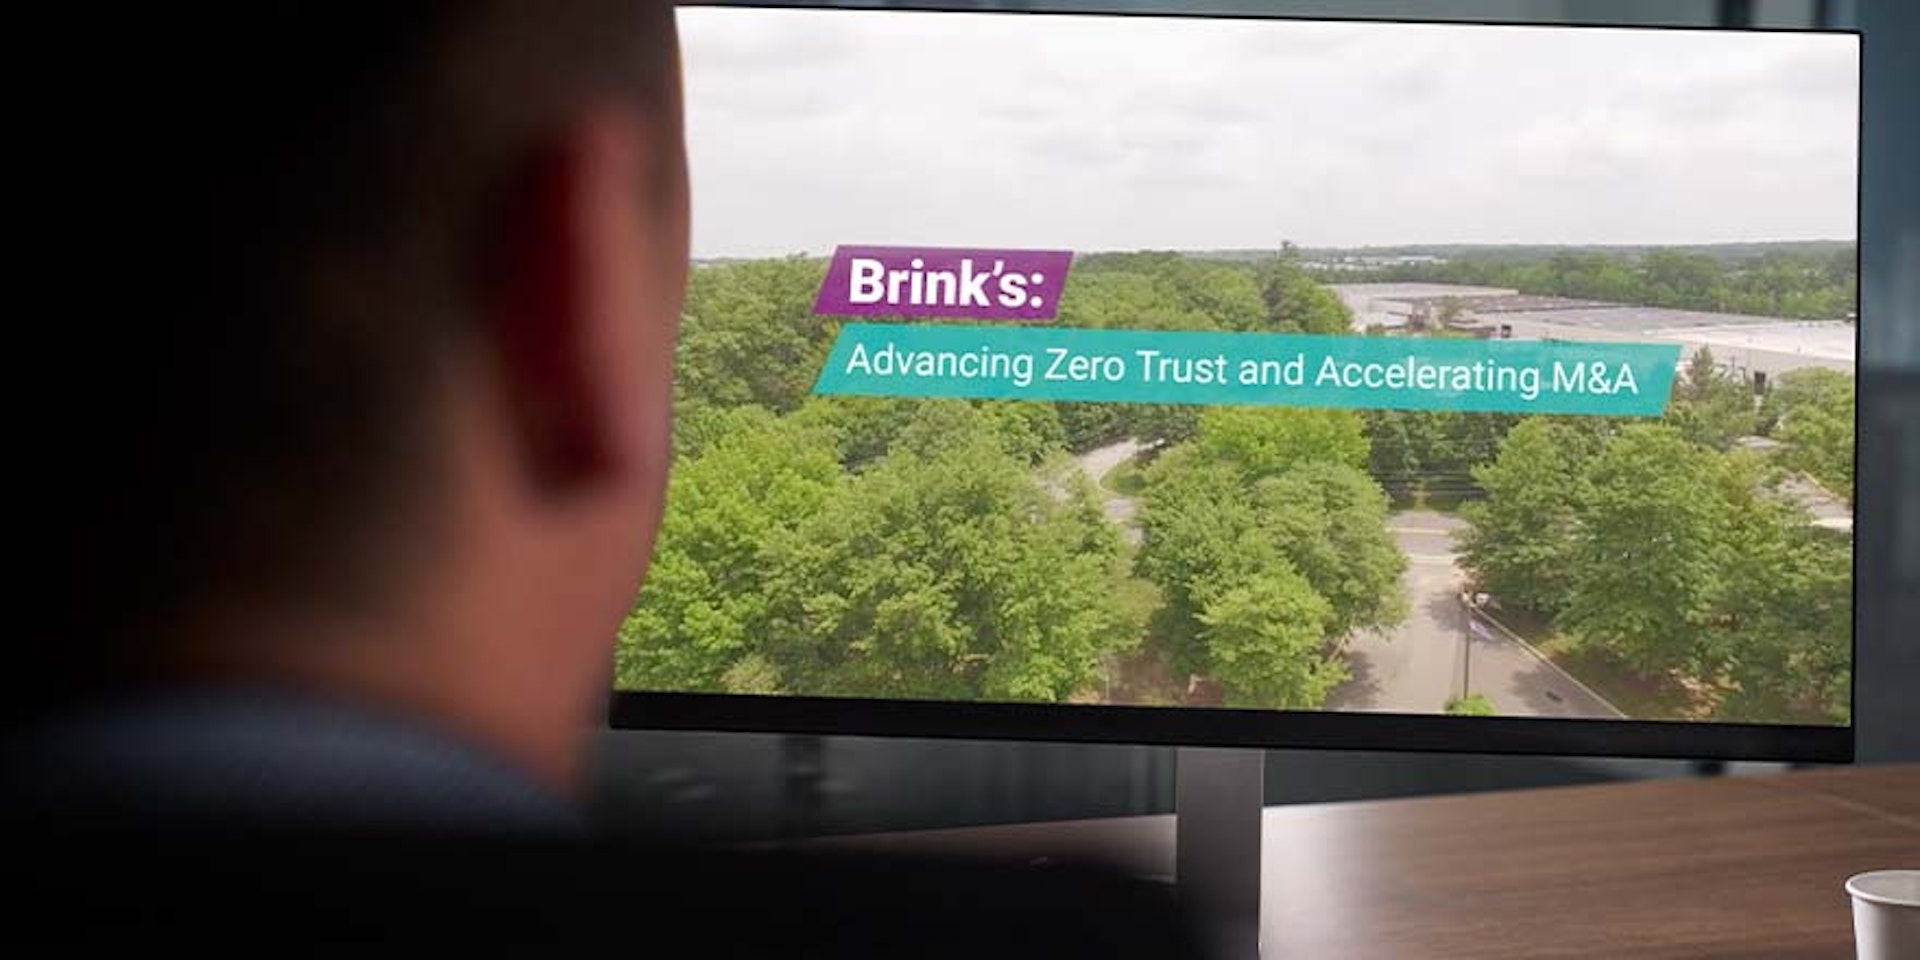 Brink's: Advancing Zero Trust and Accelerating M&A